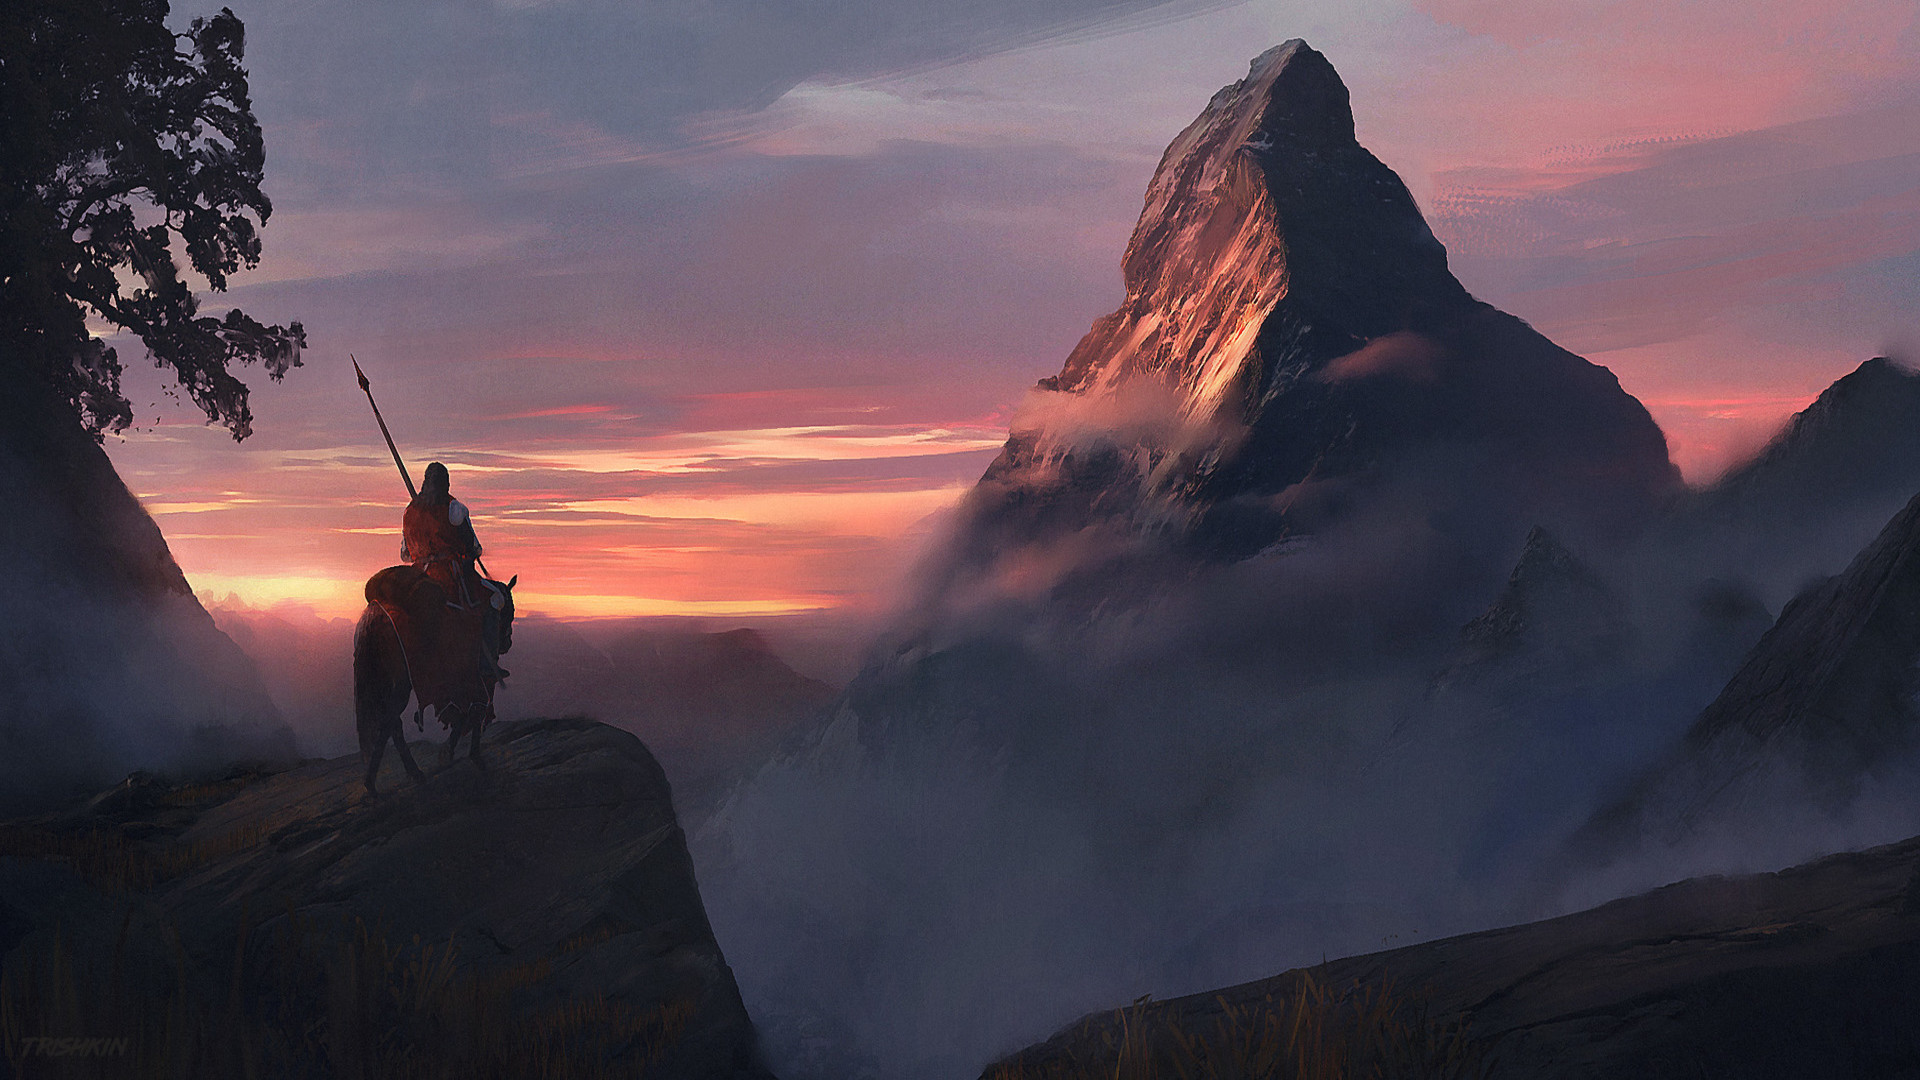 The Lonely Mountain by Alexey Trishkin